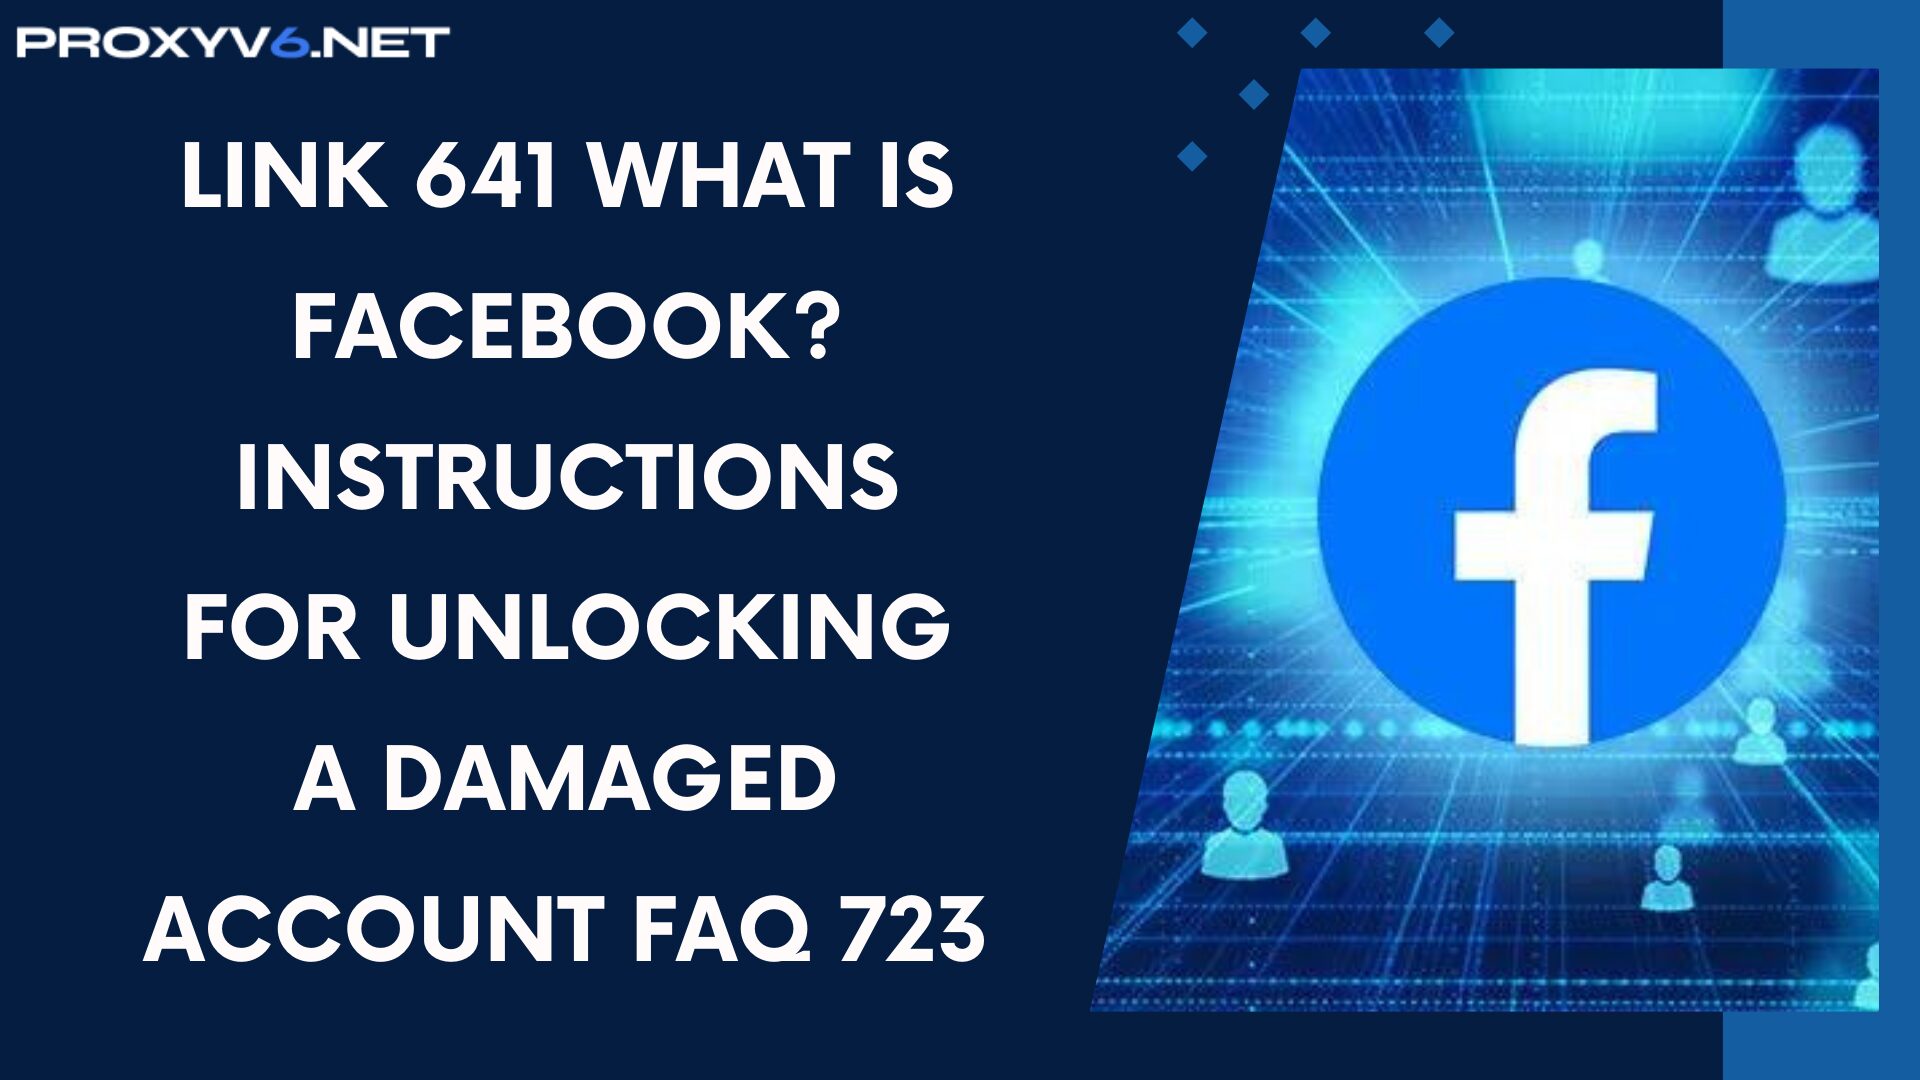 Link 641 What is Facebook? Instructions for unlocking a damaged account FAQ 723